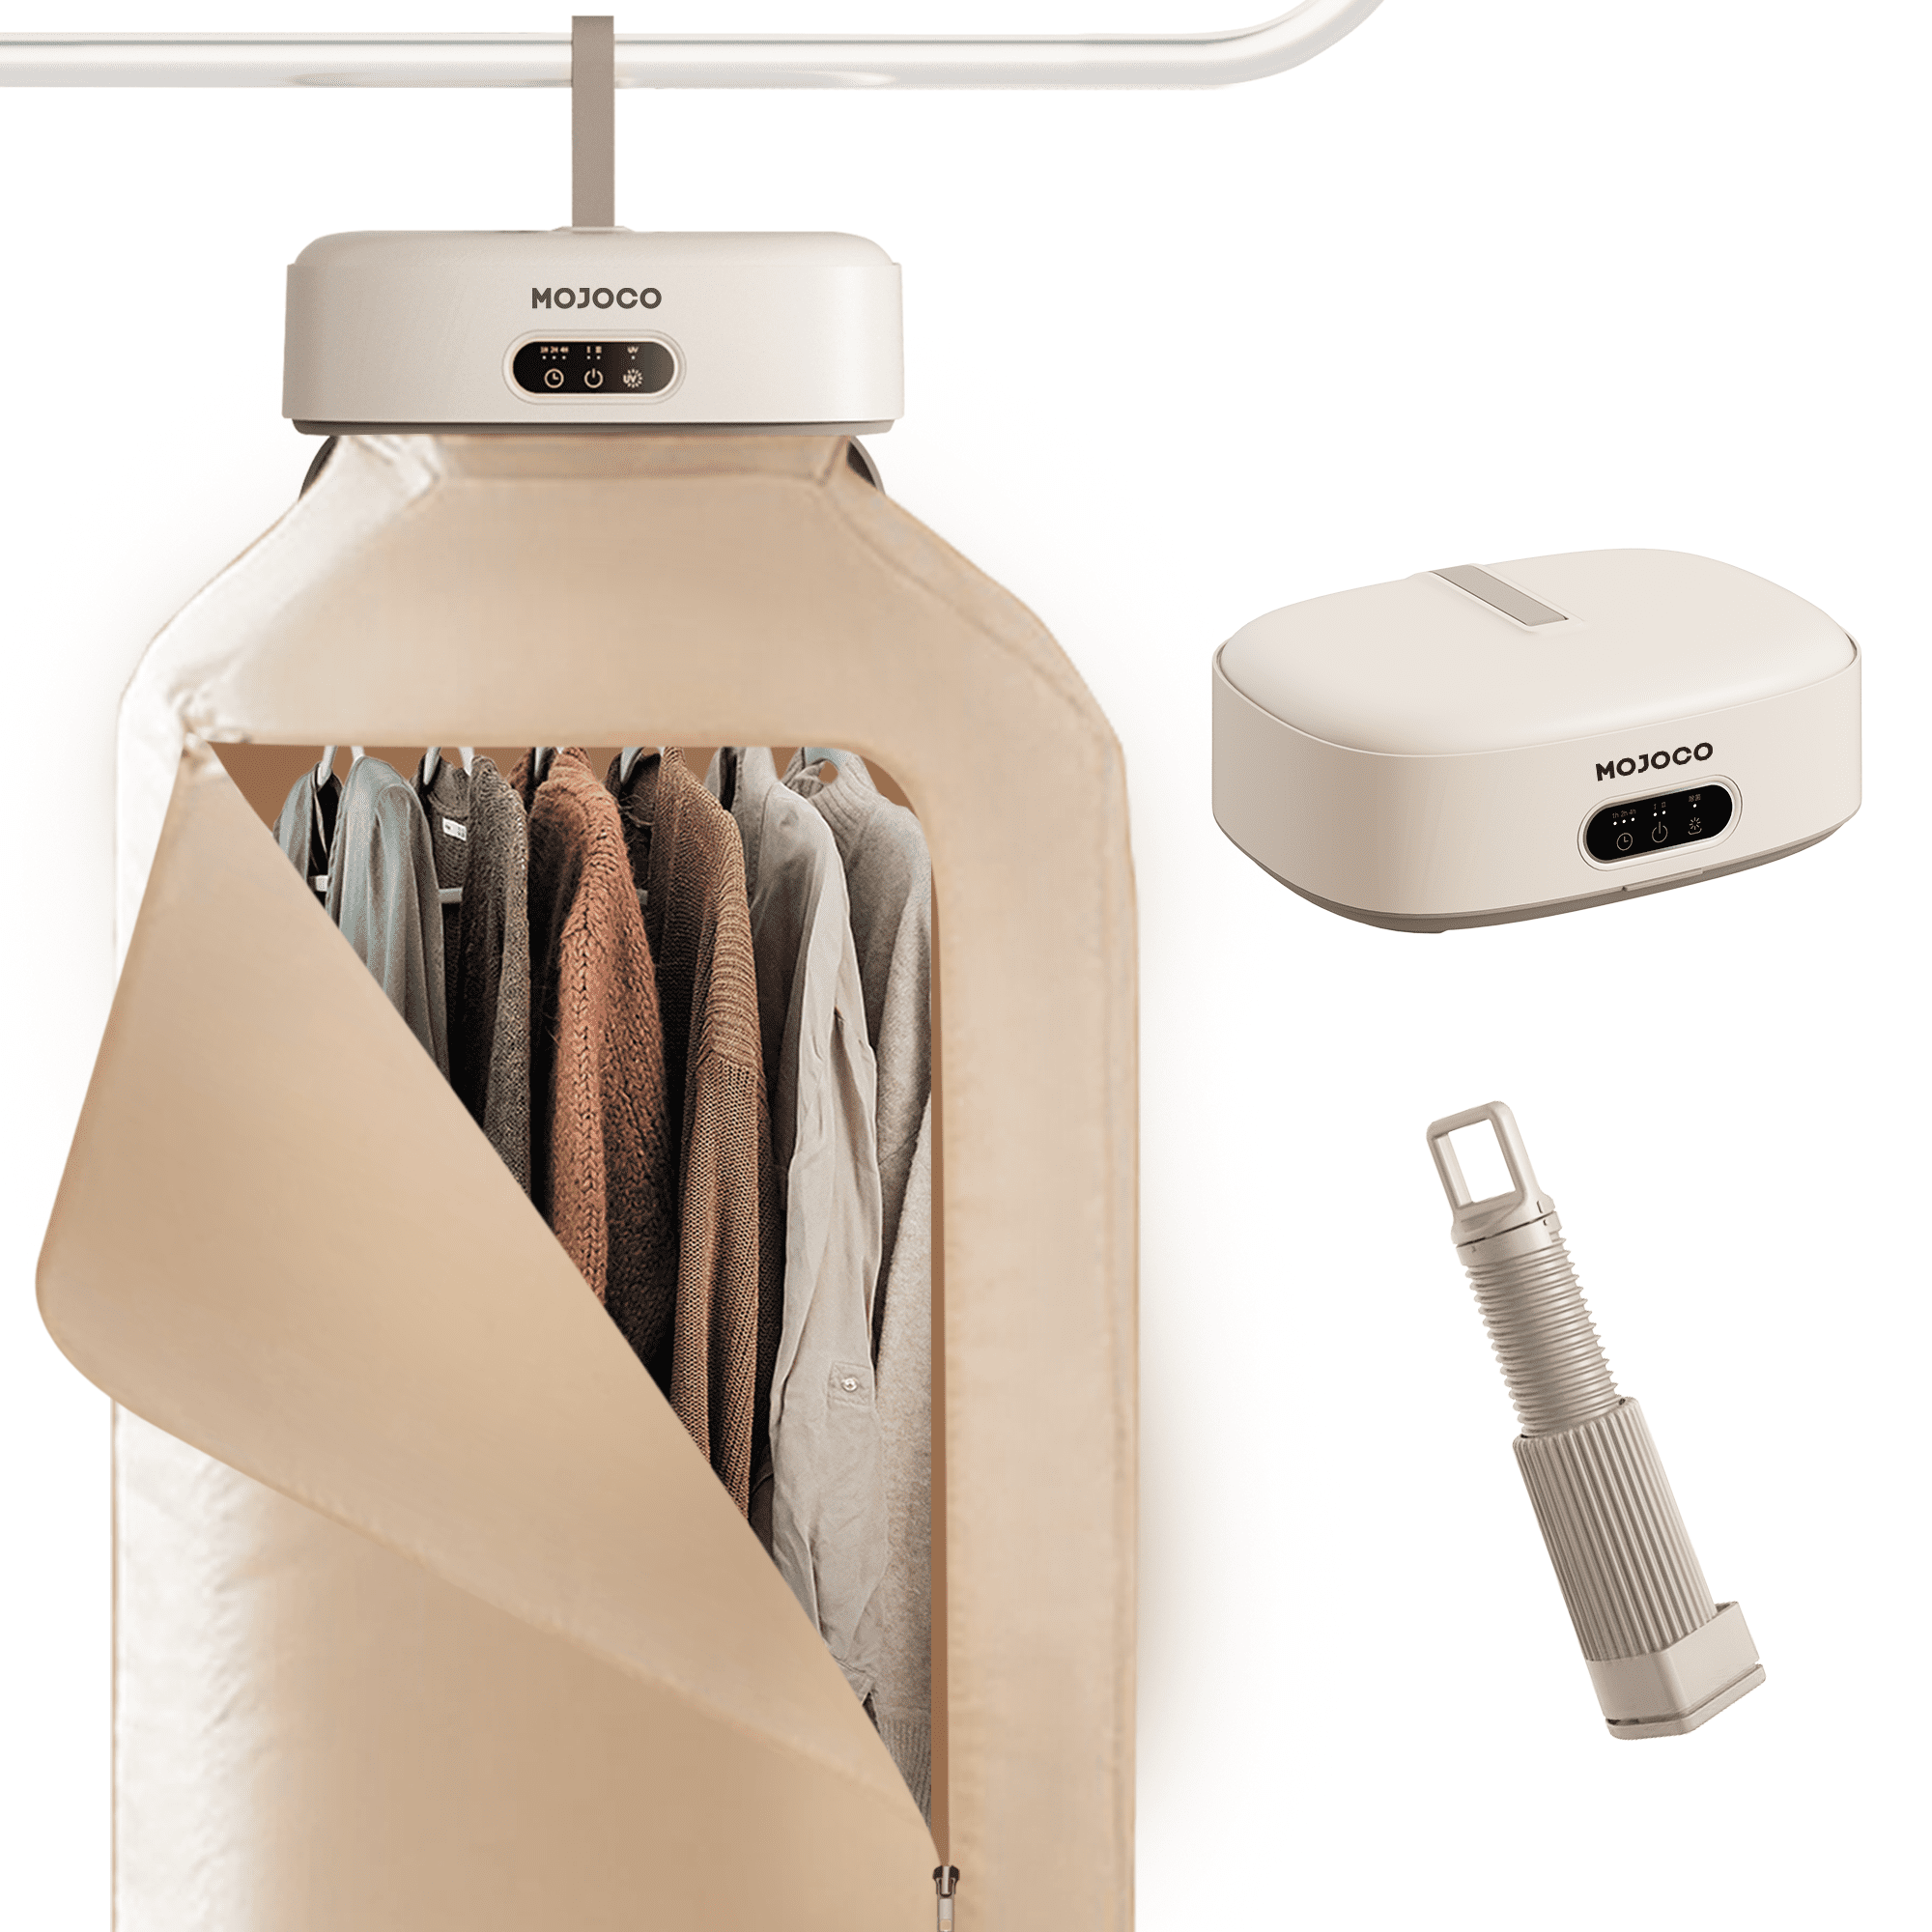 A mini clothes dryer machine BINY for small apartments or RV